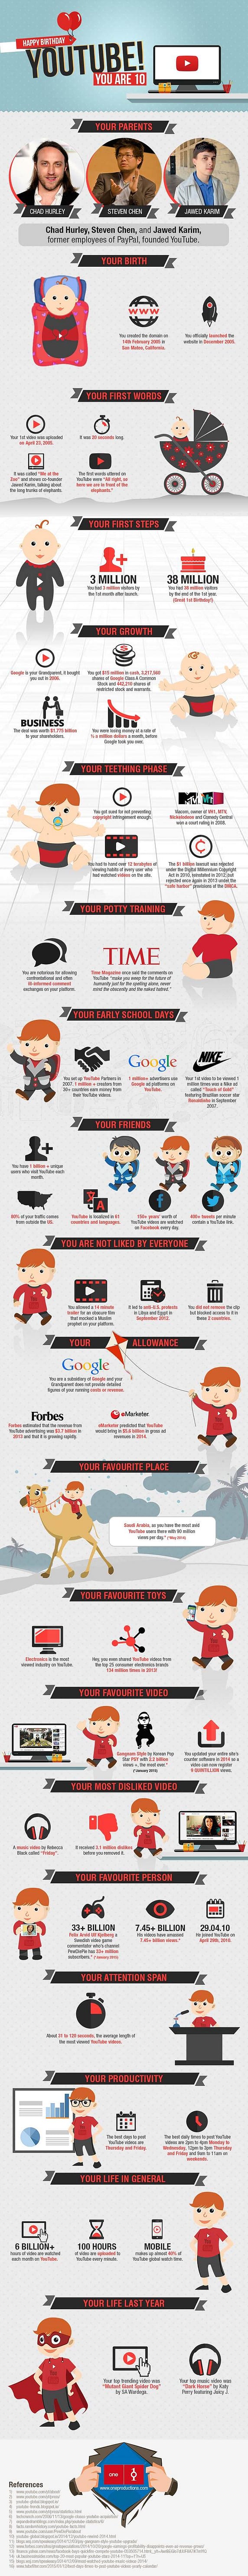 You-Tube-10-years-infographic